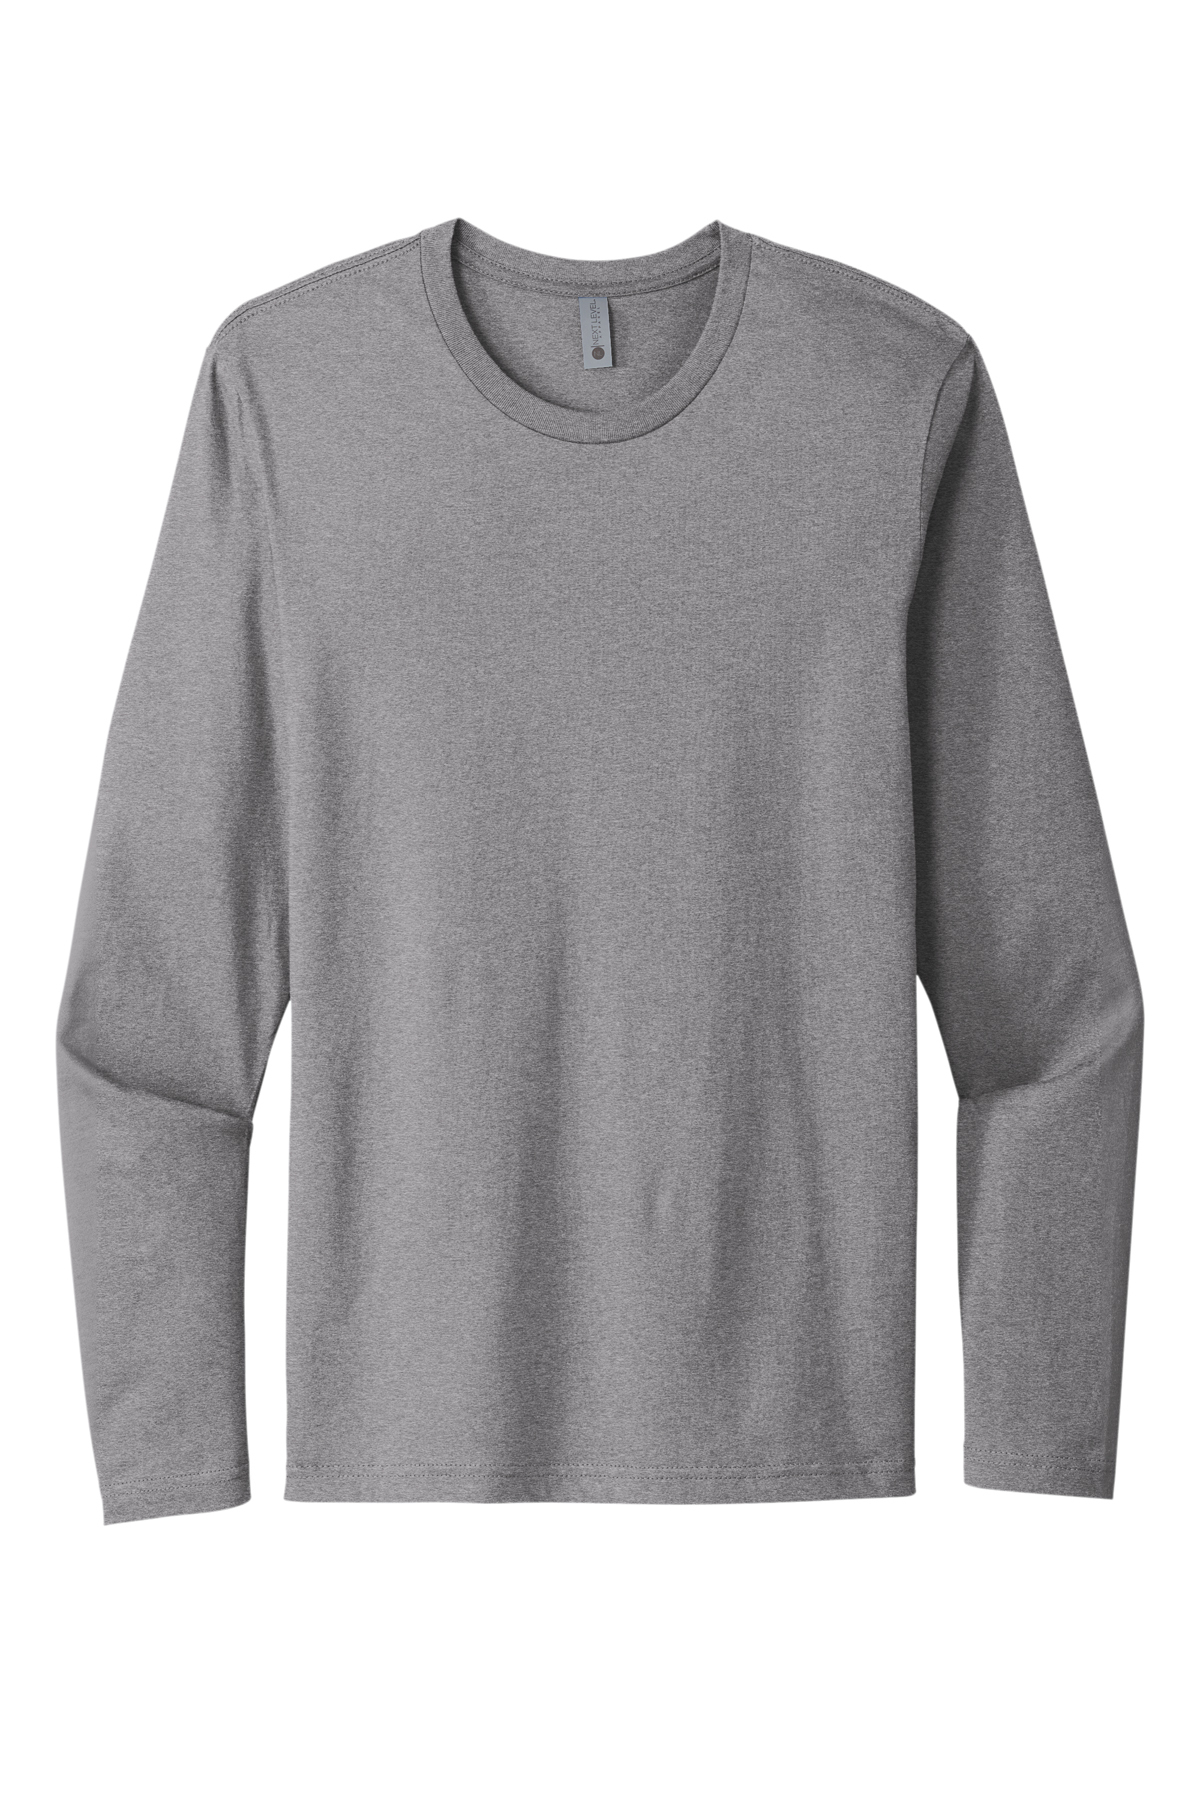 Next Level Apparel Cotton Long Sleeve Tee | Product | Company Casuals